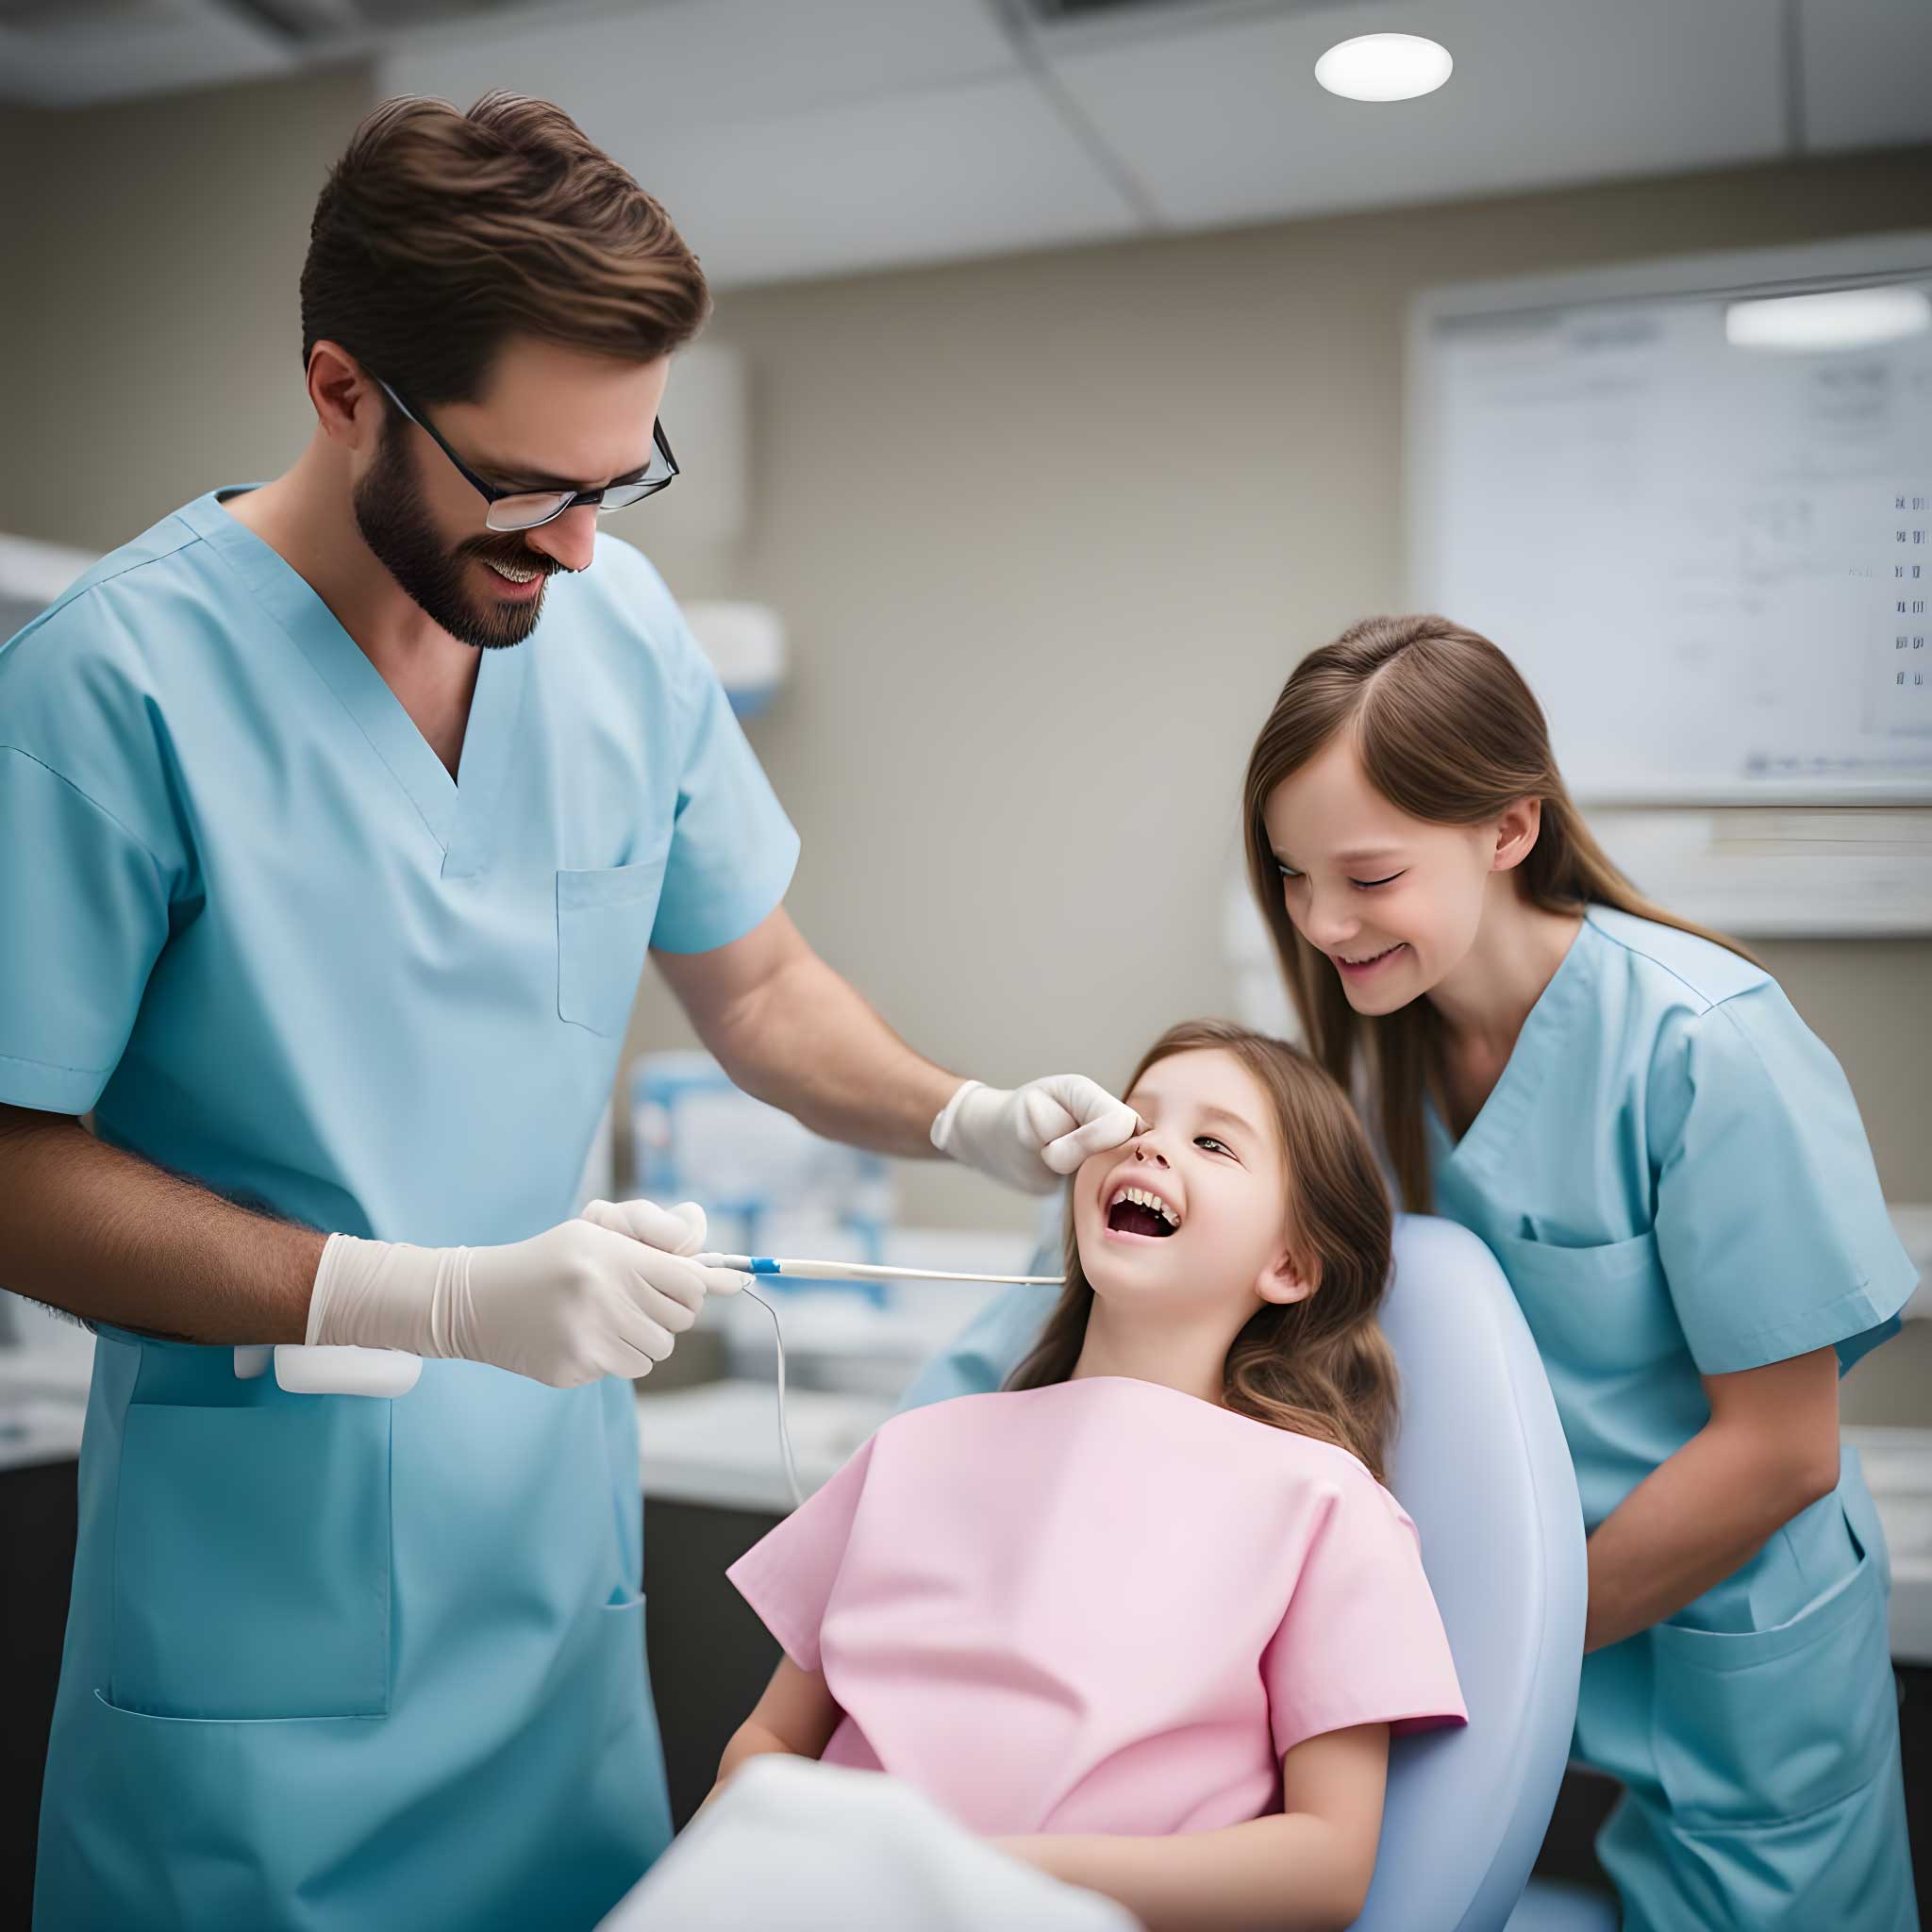 Pediatric dentistry – How does it differ from adult dentistry?